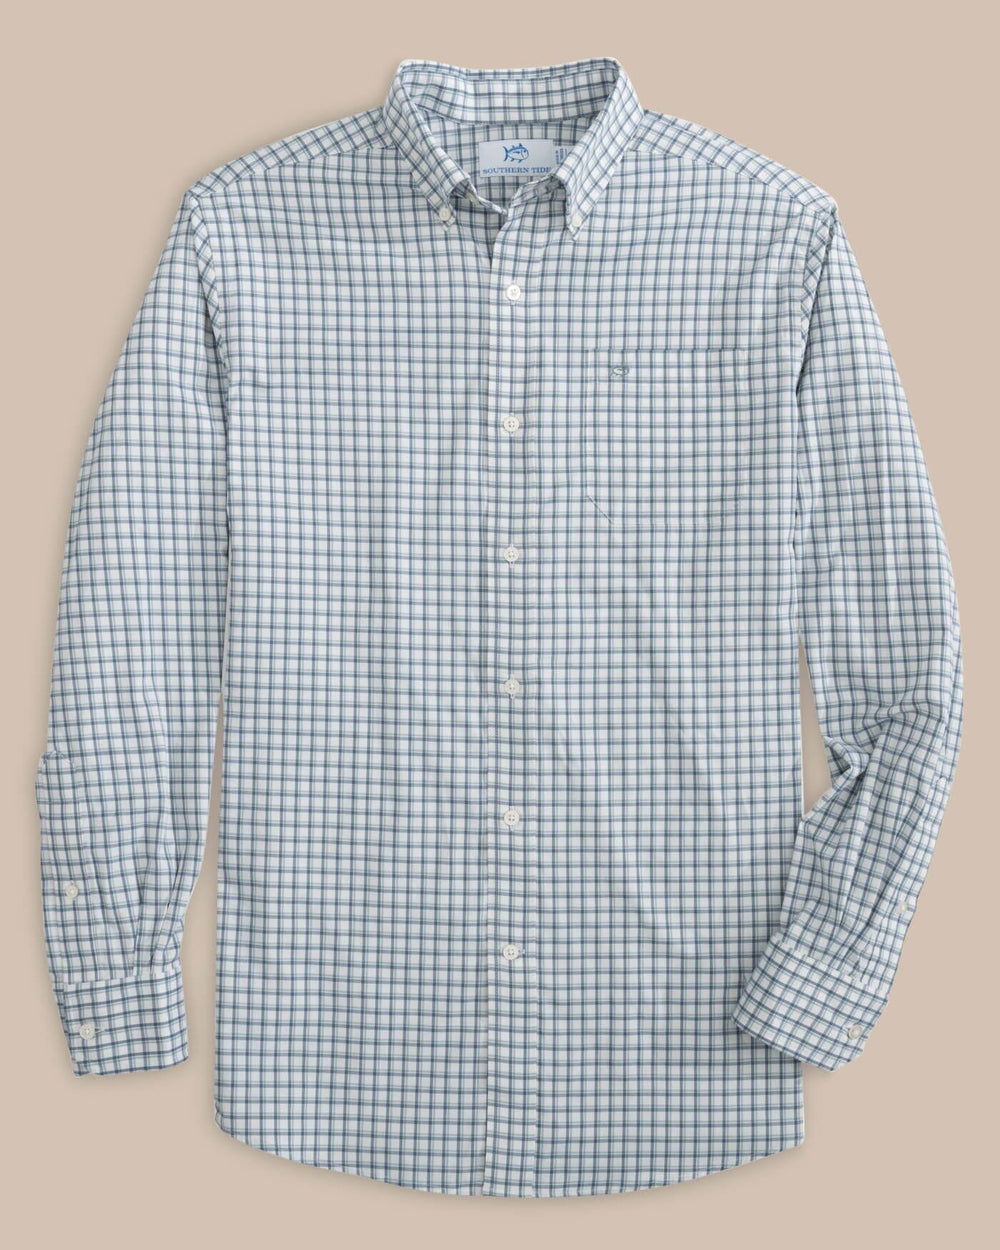 The front view of the Southern Tide Bellevue Plaid Sport Shirt by Southern Tide - Blue Haze